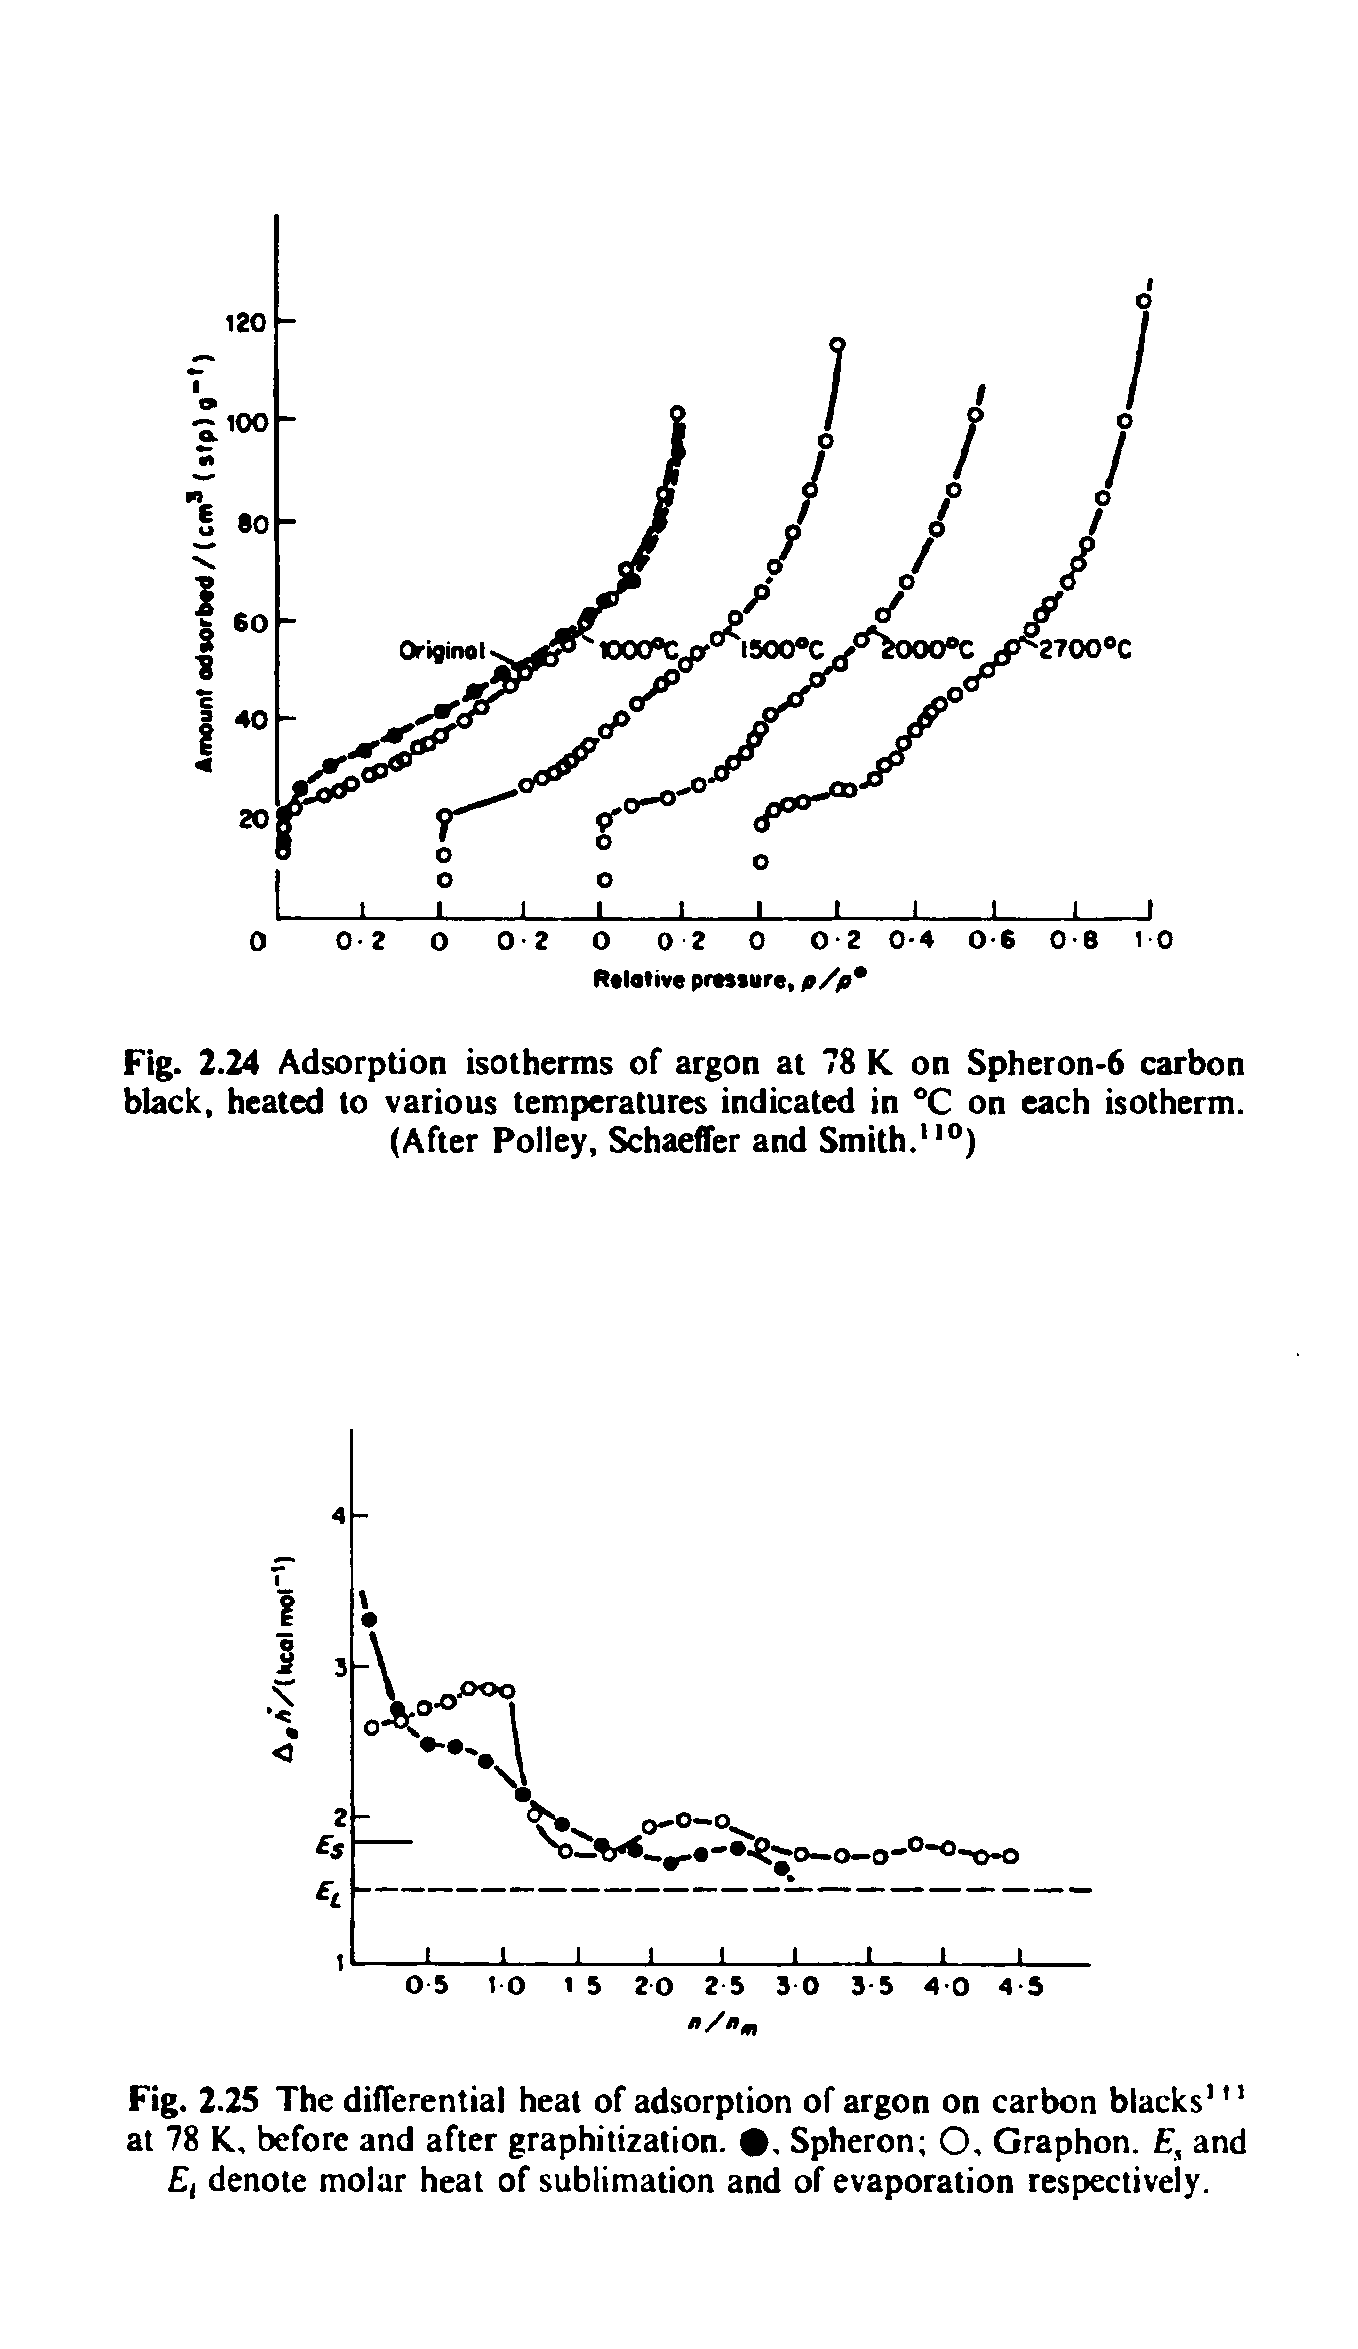 Fig. 2.24 Adsorption isotherms of argon at 78 K on Spheron-6 carbon black, heated to various temperatures indicated in °C on each isotherm. (After Polley, Schaeffer and Smith. )...